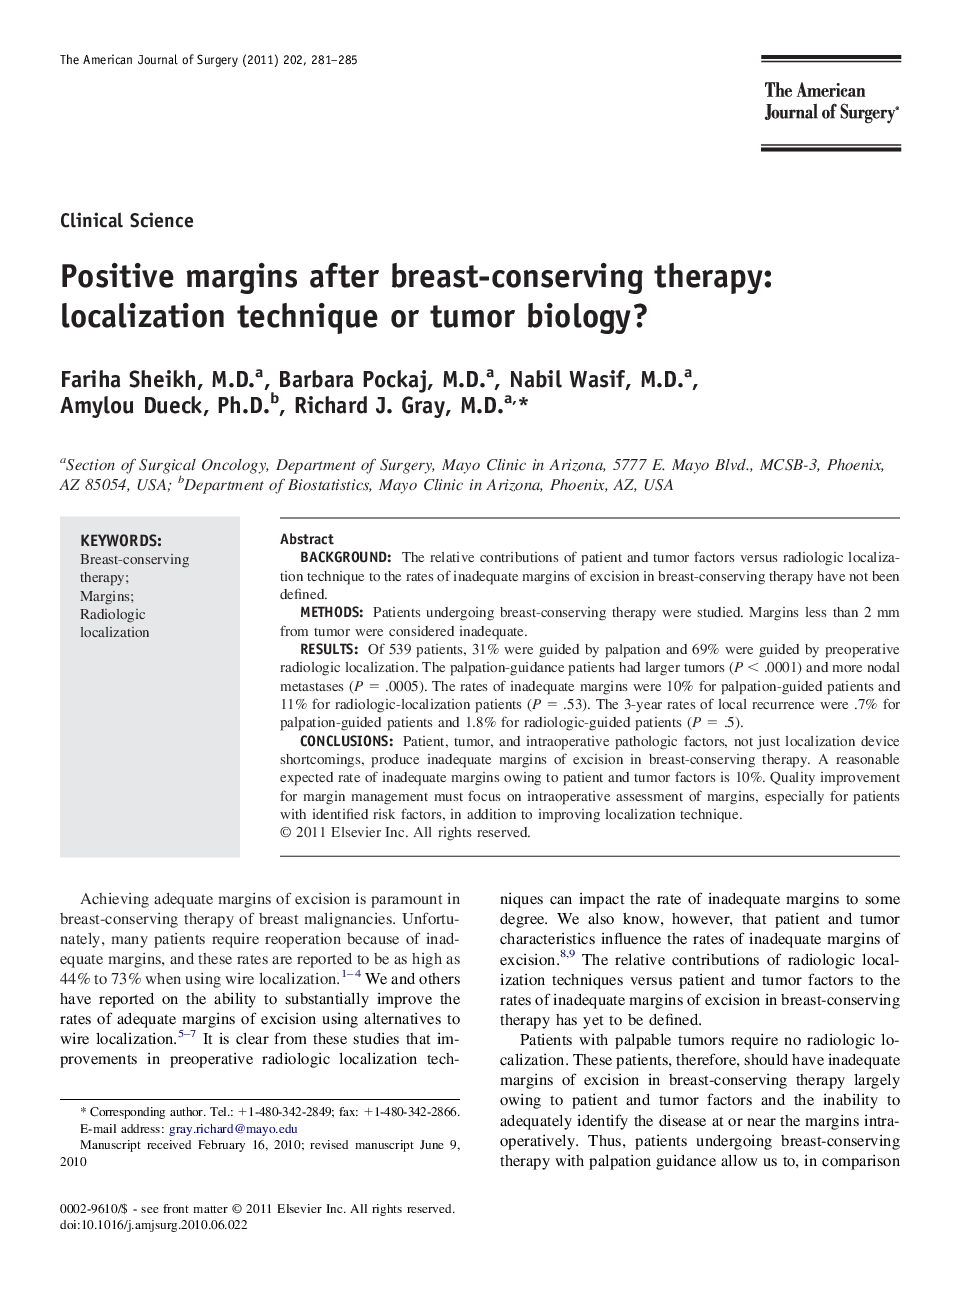 Positive margins after breast-conserving therapy: localization technique or tumor biology?